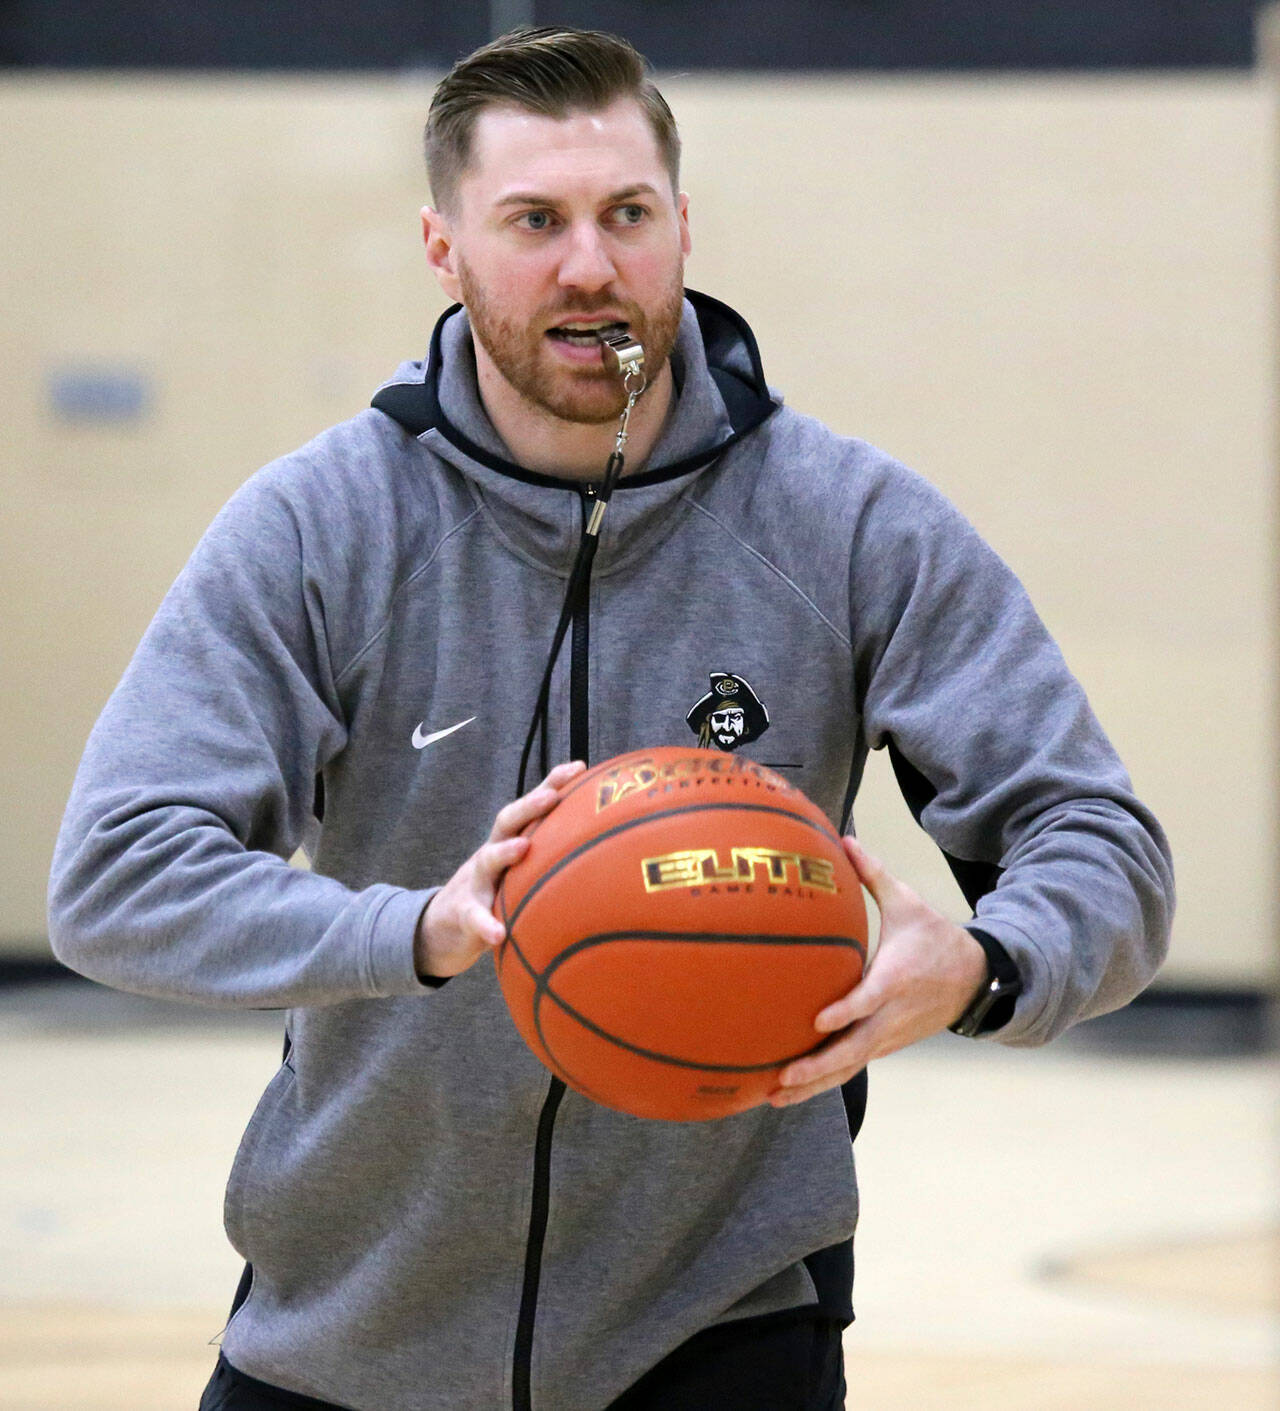 Donald Rollman, Peninsula College men’s basketball head coach, has just six true freshman on his 16-man roster heading into a promising 2021-2022 season that kicked off this past weekend. Photo by Rick Ross/Peninsula College